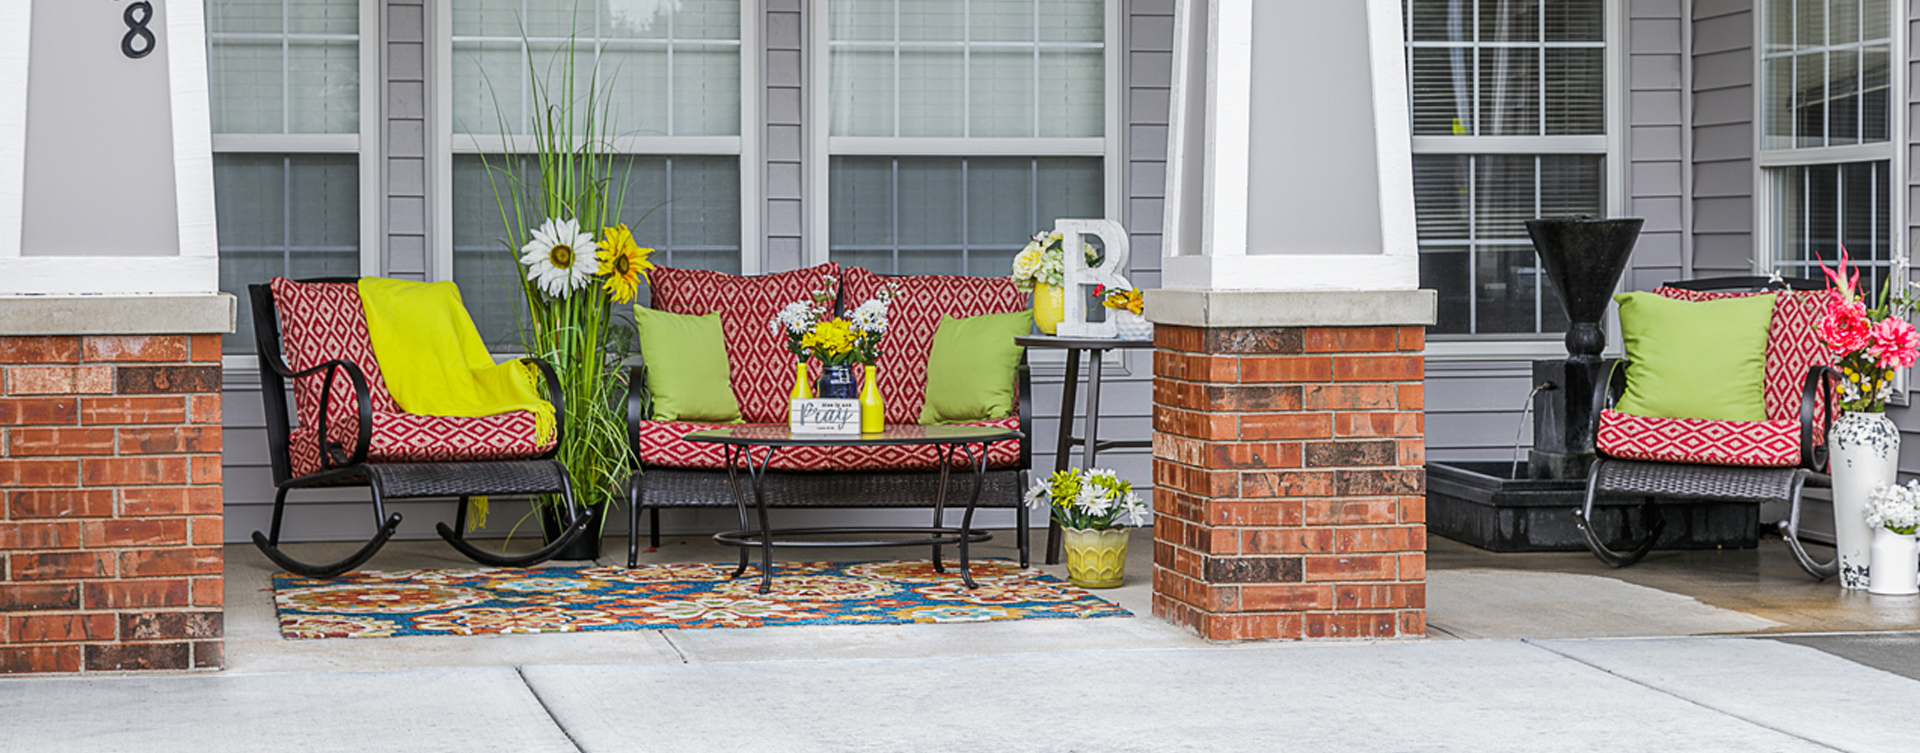 Enjoy conversations with friends on the porch at Bickford of Omaha - Blondo